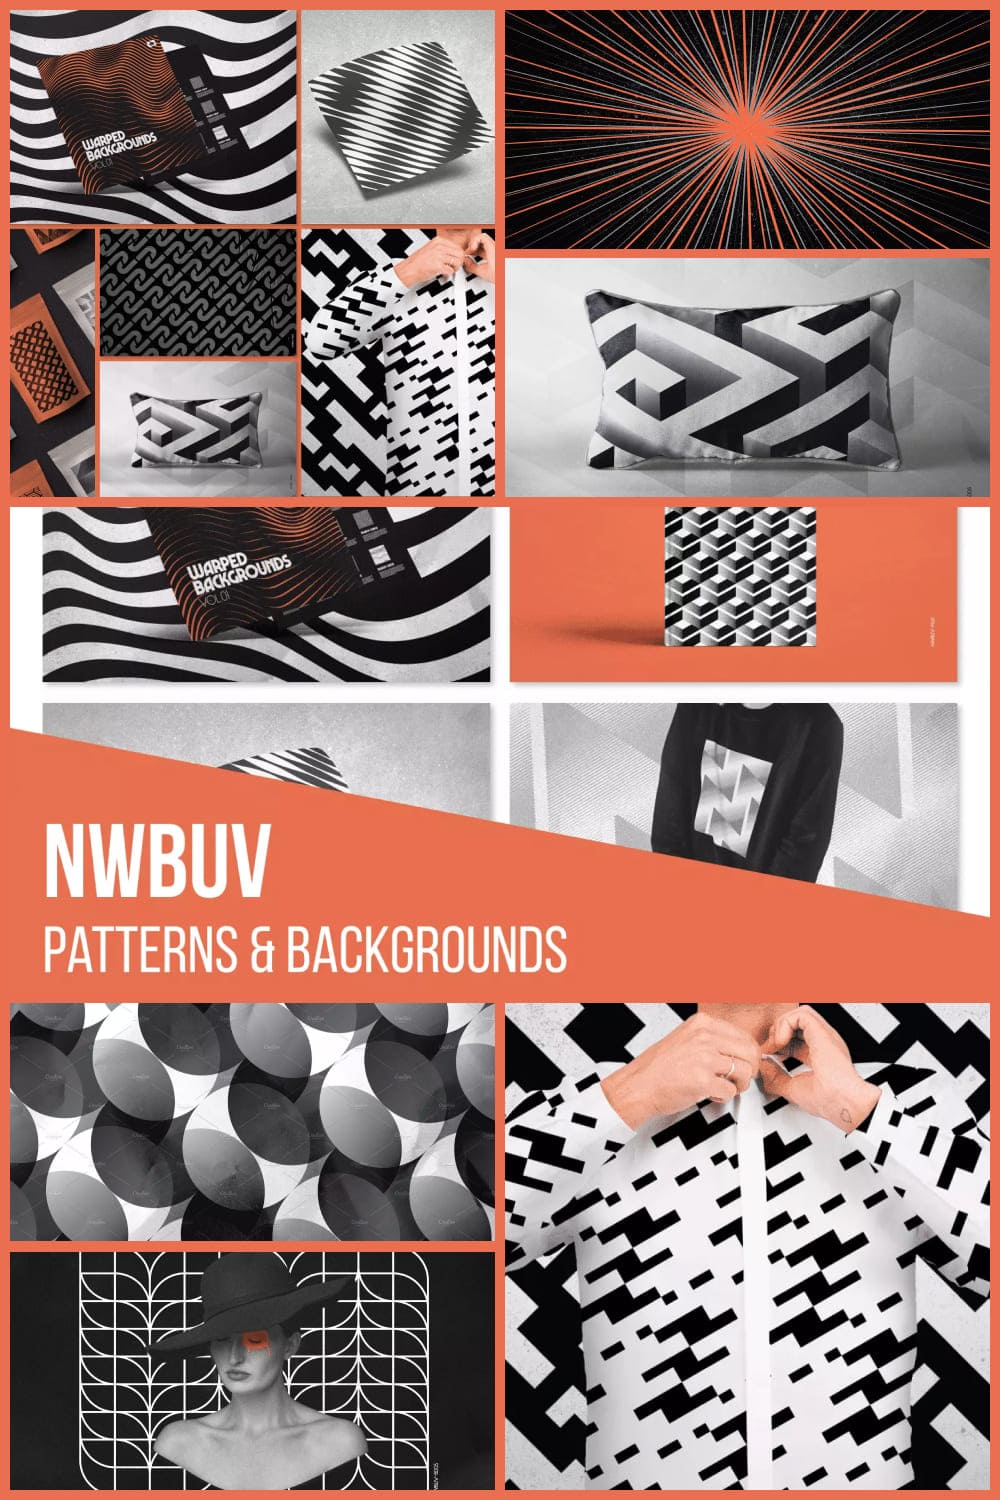 Collage of images of black and white geometric patterns.